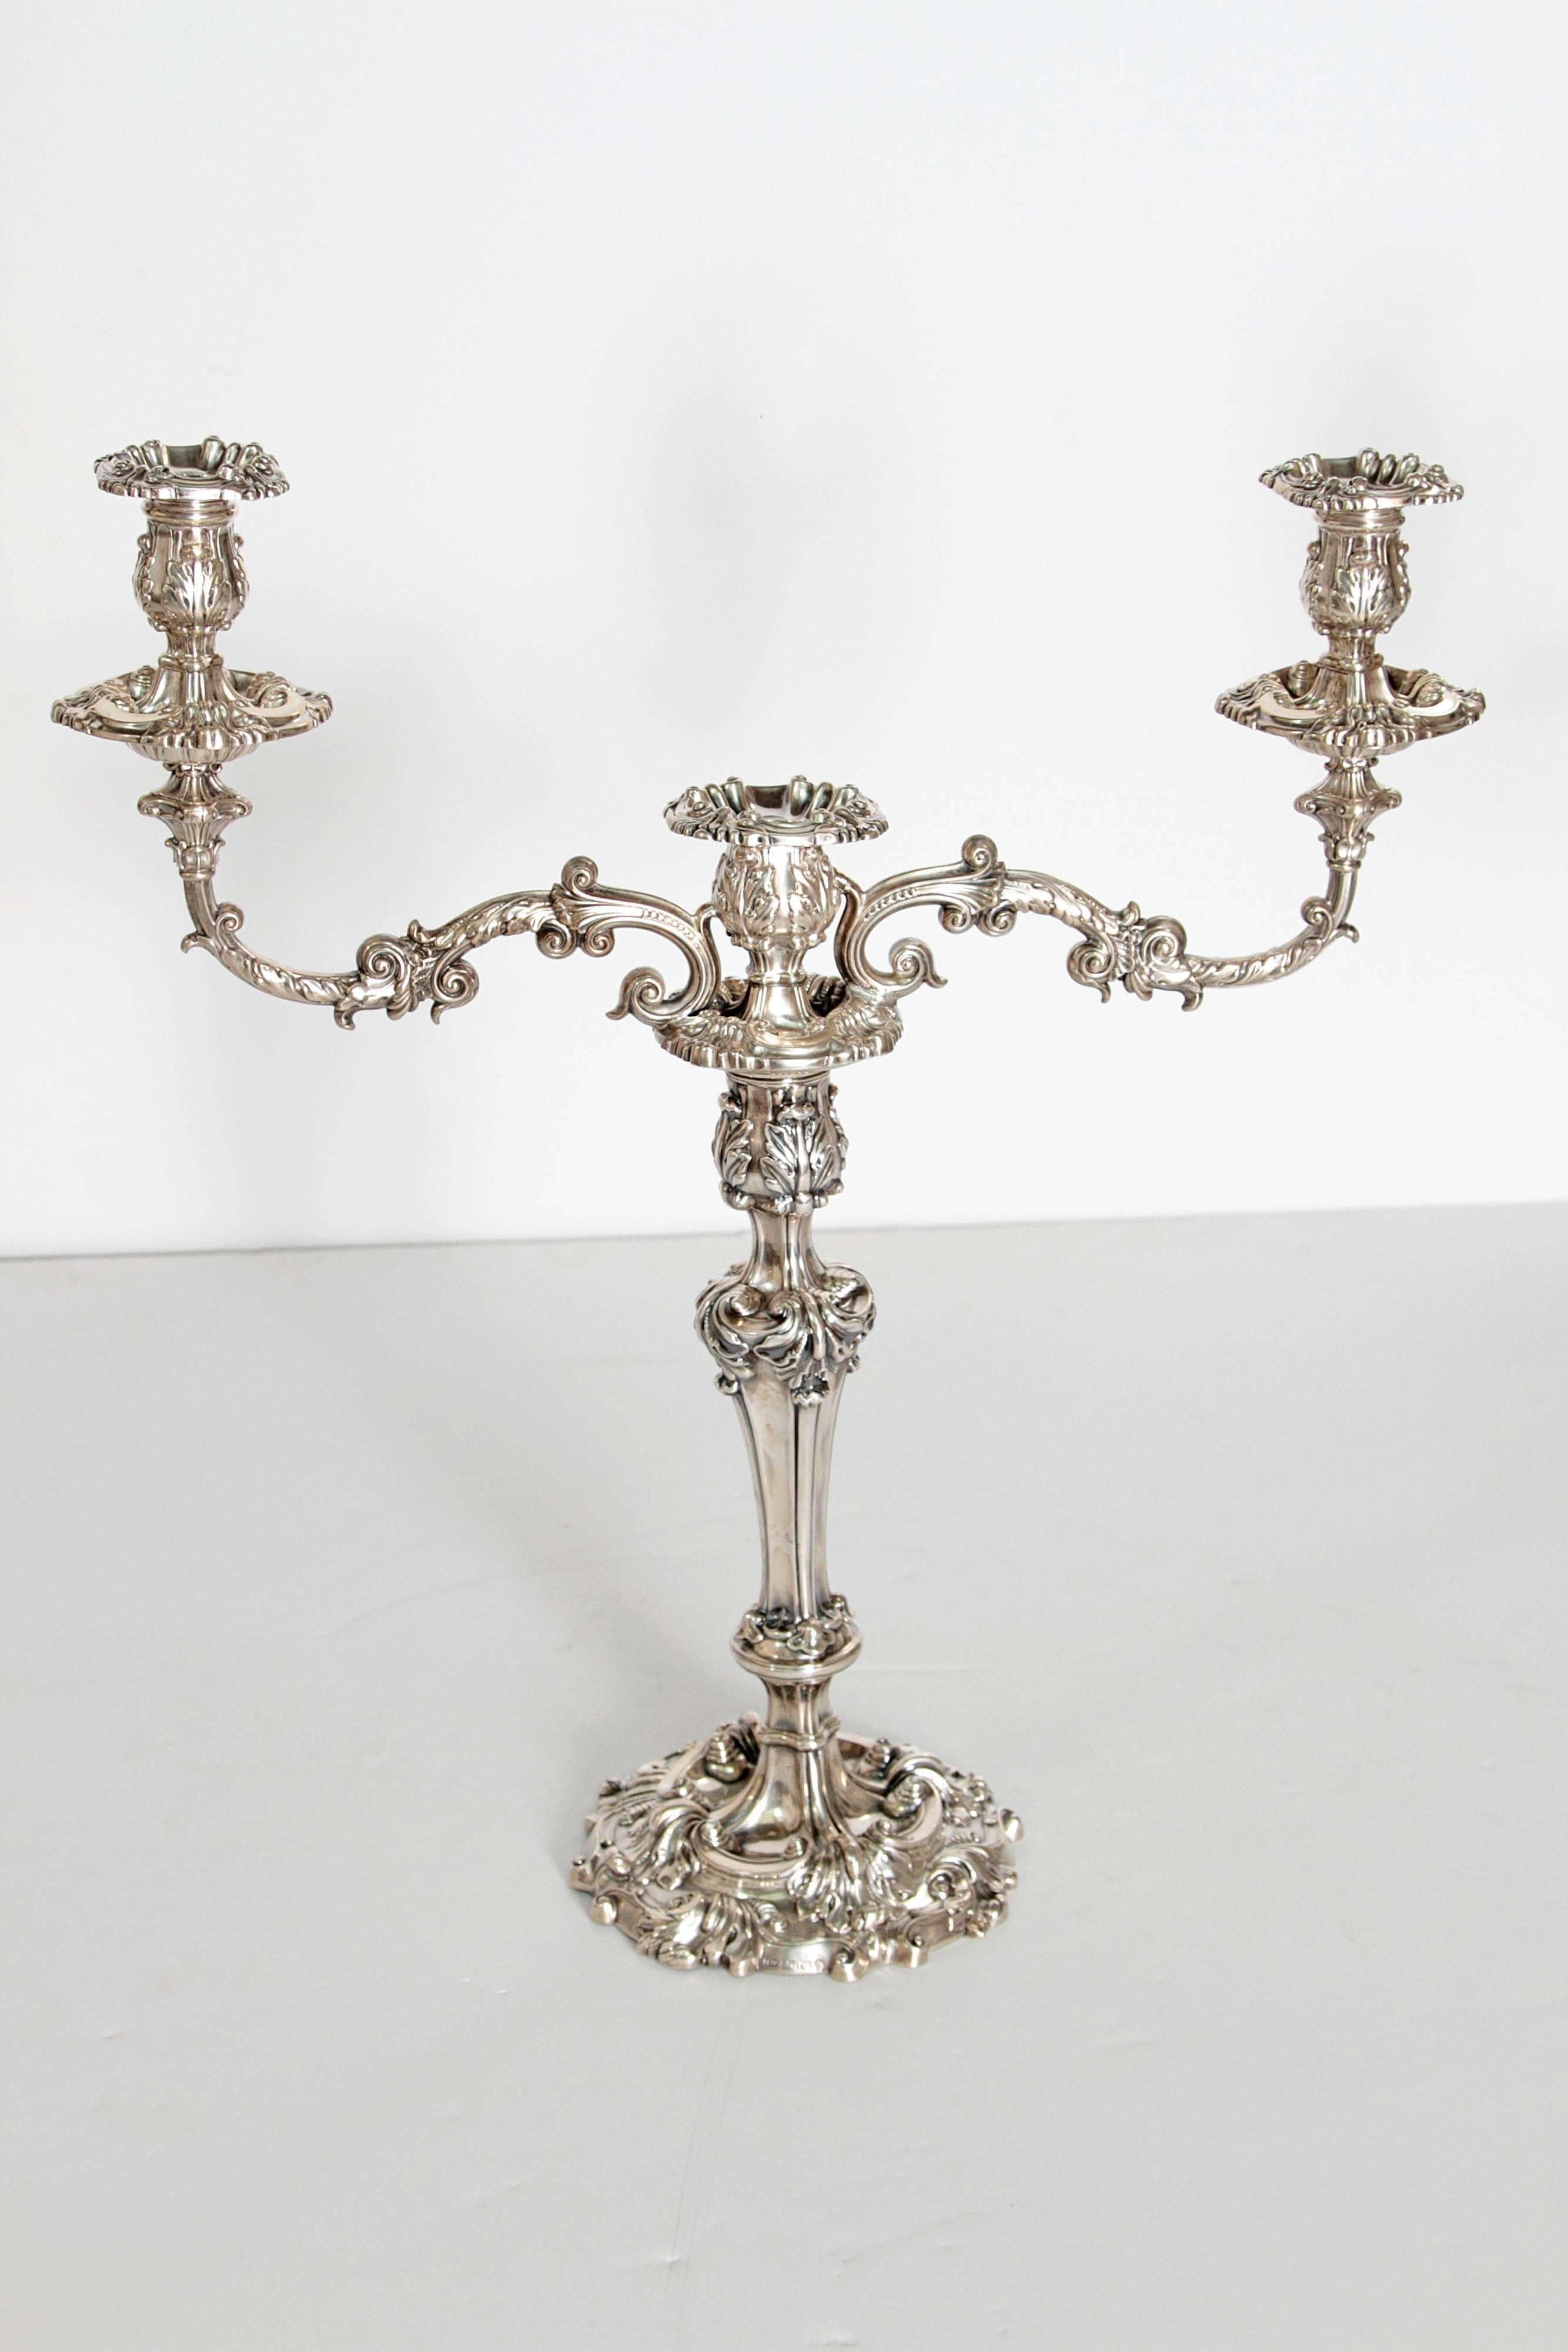 A pair of English Sheffield sterling silver candelabra with very elaborate detail. These early candlesticks convert to a three light candelabra with later additions. Base circa 1816 by John Watson & Son, top circa 1837 by Henry Wilkinson & Co.